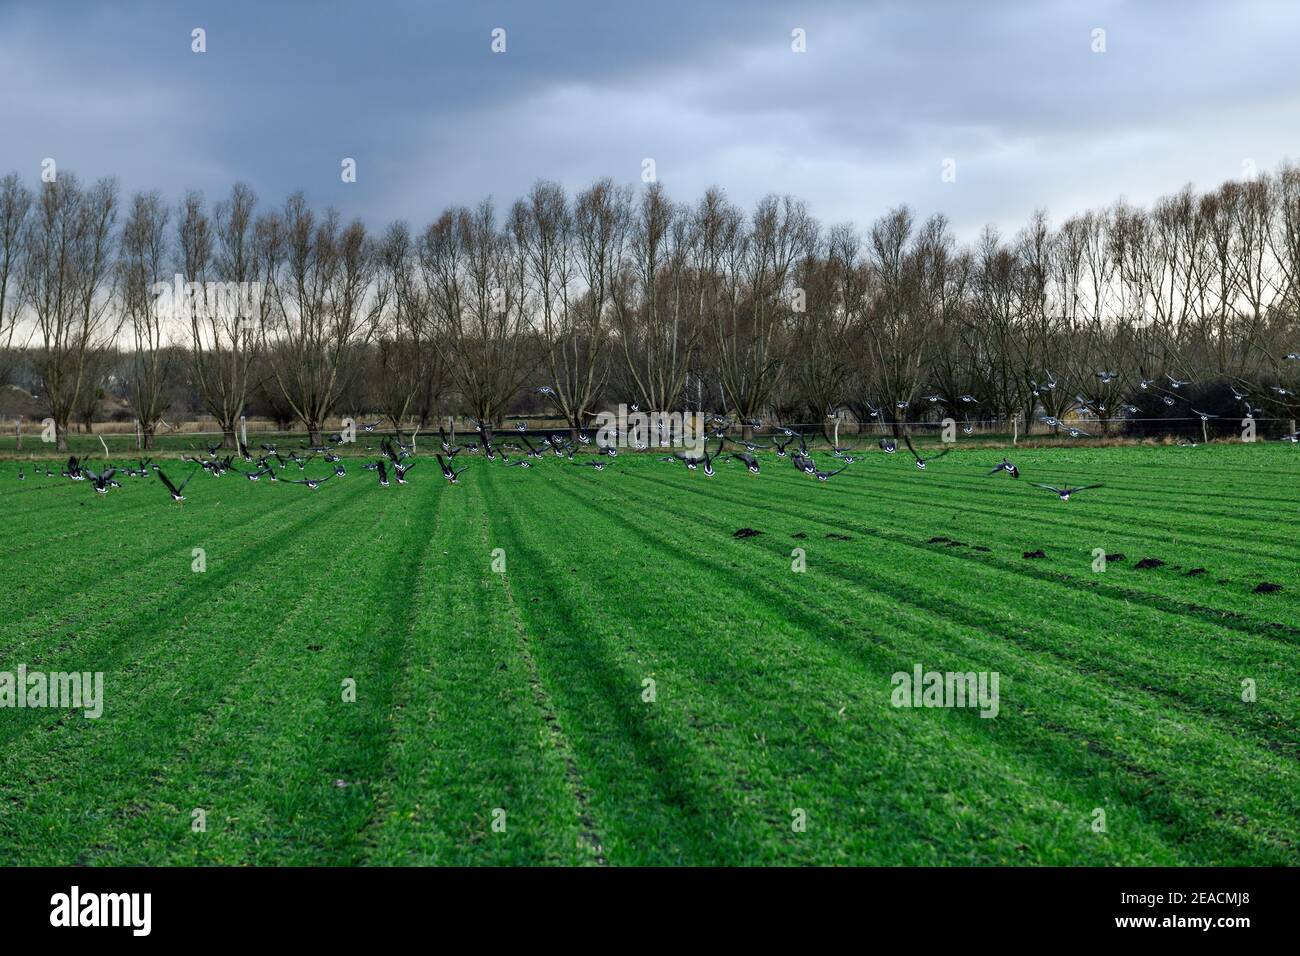 Harvested field with young, green, risen seeds. Spring with flight of geese Stock Photo